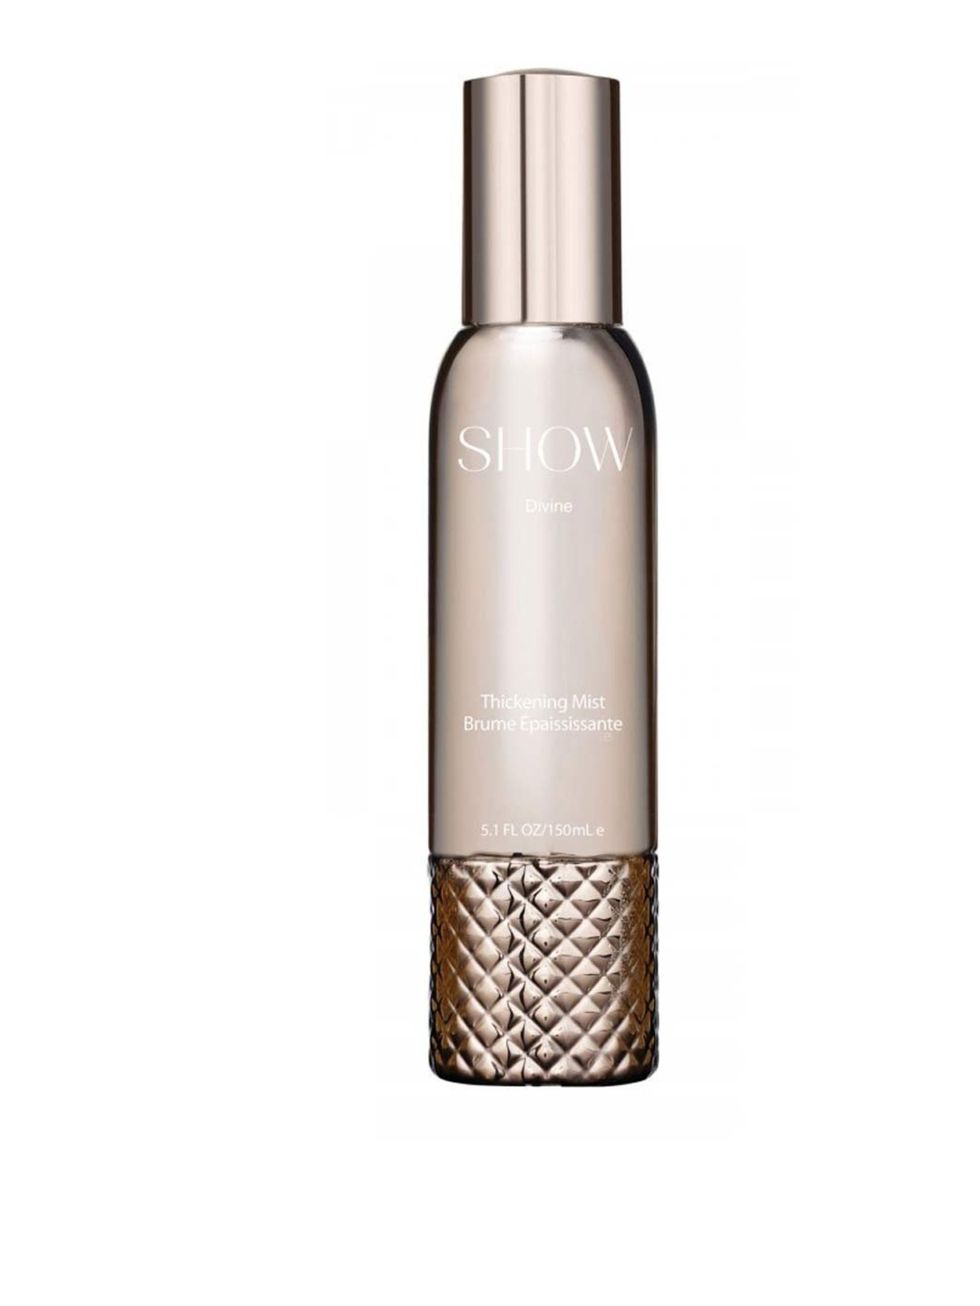 <p><a href="http://www.selfridges.com/en/Beauty/Categories/NEW-IN/Haircare/Divine-thickening-mist-150ml_334-3003061-10121SBRS0007/">Show Beauty Thickening Mist, £35</a></p><p>Lightly fragranced with sweet lychees, this thickening spray will give you smoot